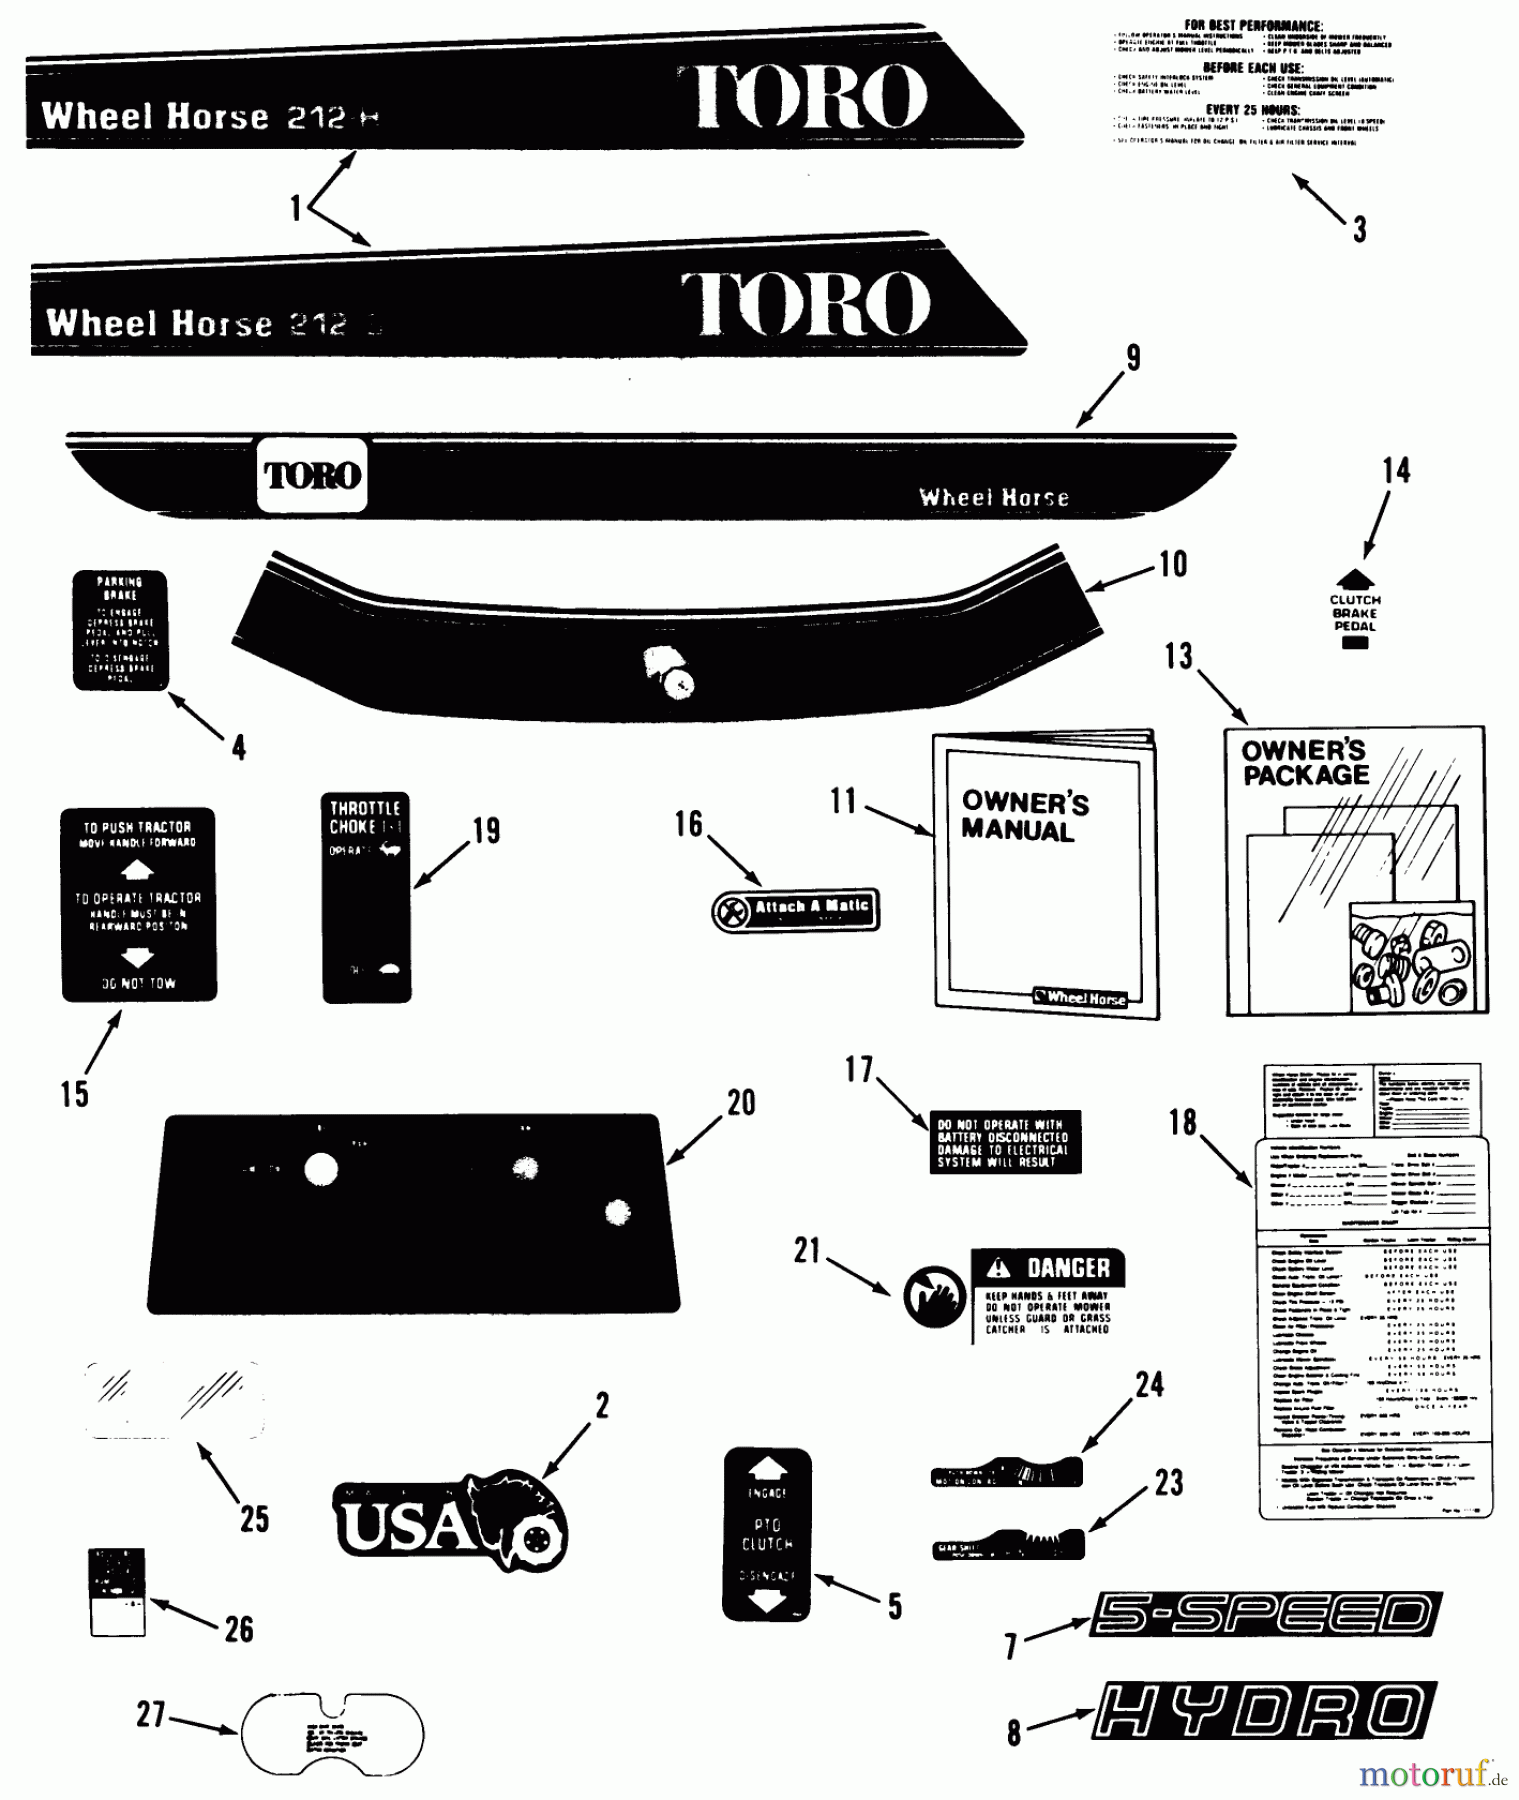  Toro Neu Mowers, Lawn & Garden Tractor Seite 1 32-12BEA2 (212-H) - Toro 212-H Tractor, 1991 (1000001-1999999) DECAL & MISCELLANEOUS PARTS ASSEMBLY